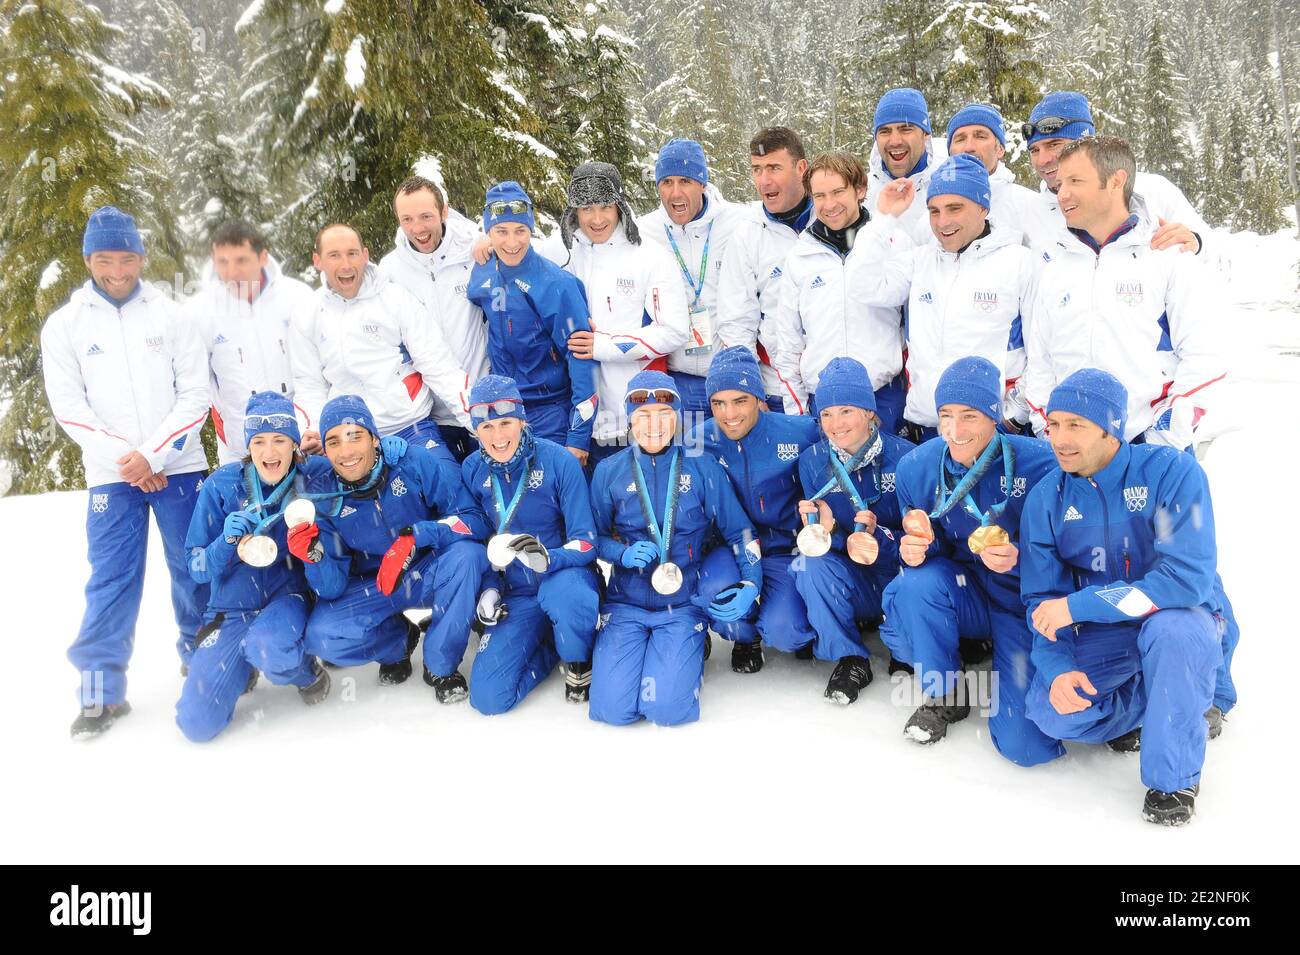 France's Biathlon team and coaches pose with their medals after the last Biathlon competition for the Vancouver 2010 XXI Olympic Winter Games at Olympic Park in Whistler, Canada on February 26, 2010. Photo by Gouhier-Hahn-Nebinger/ABACAPRESS.COM Stock Photo